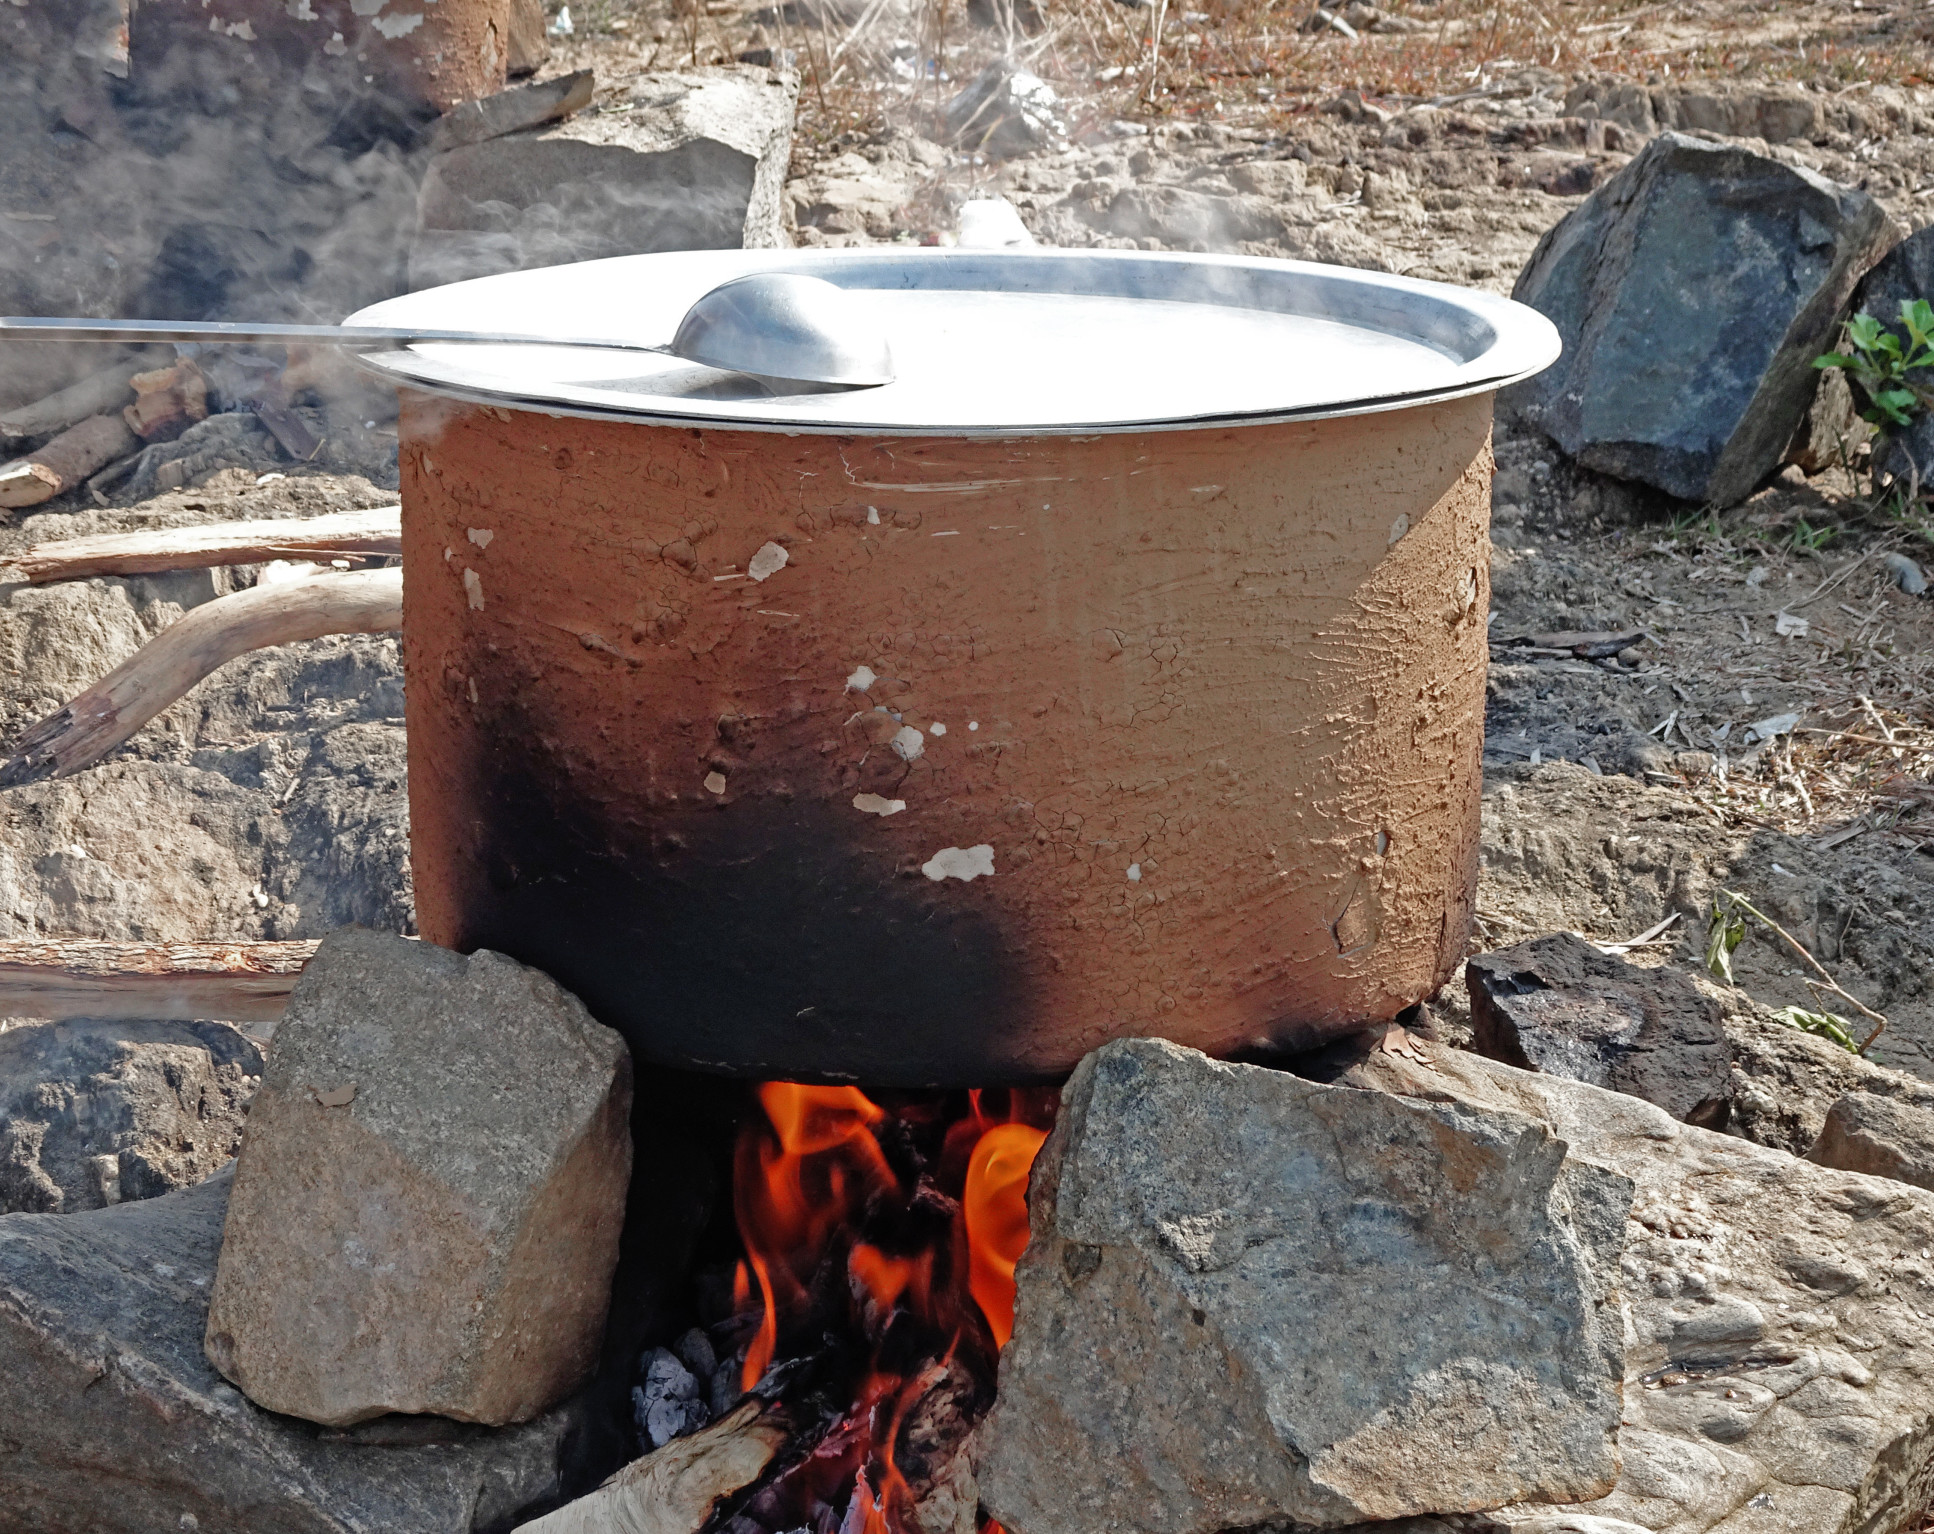 Cooking a pot over firewood and stones